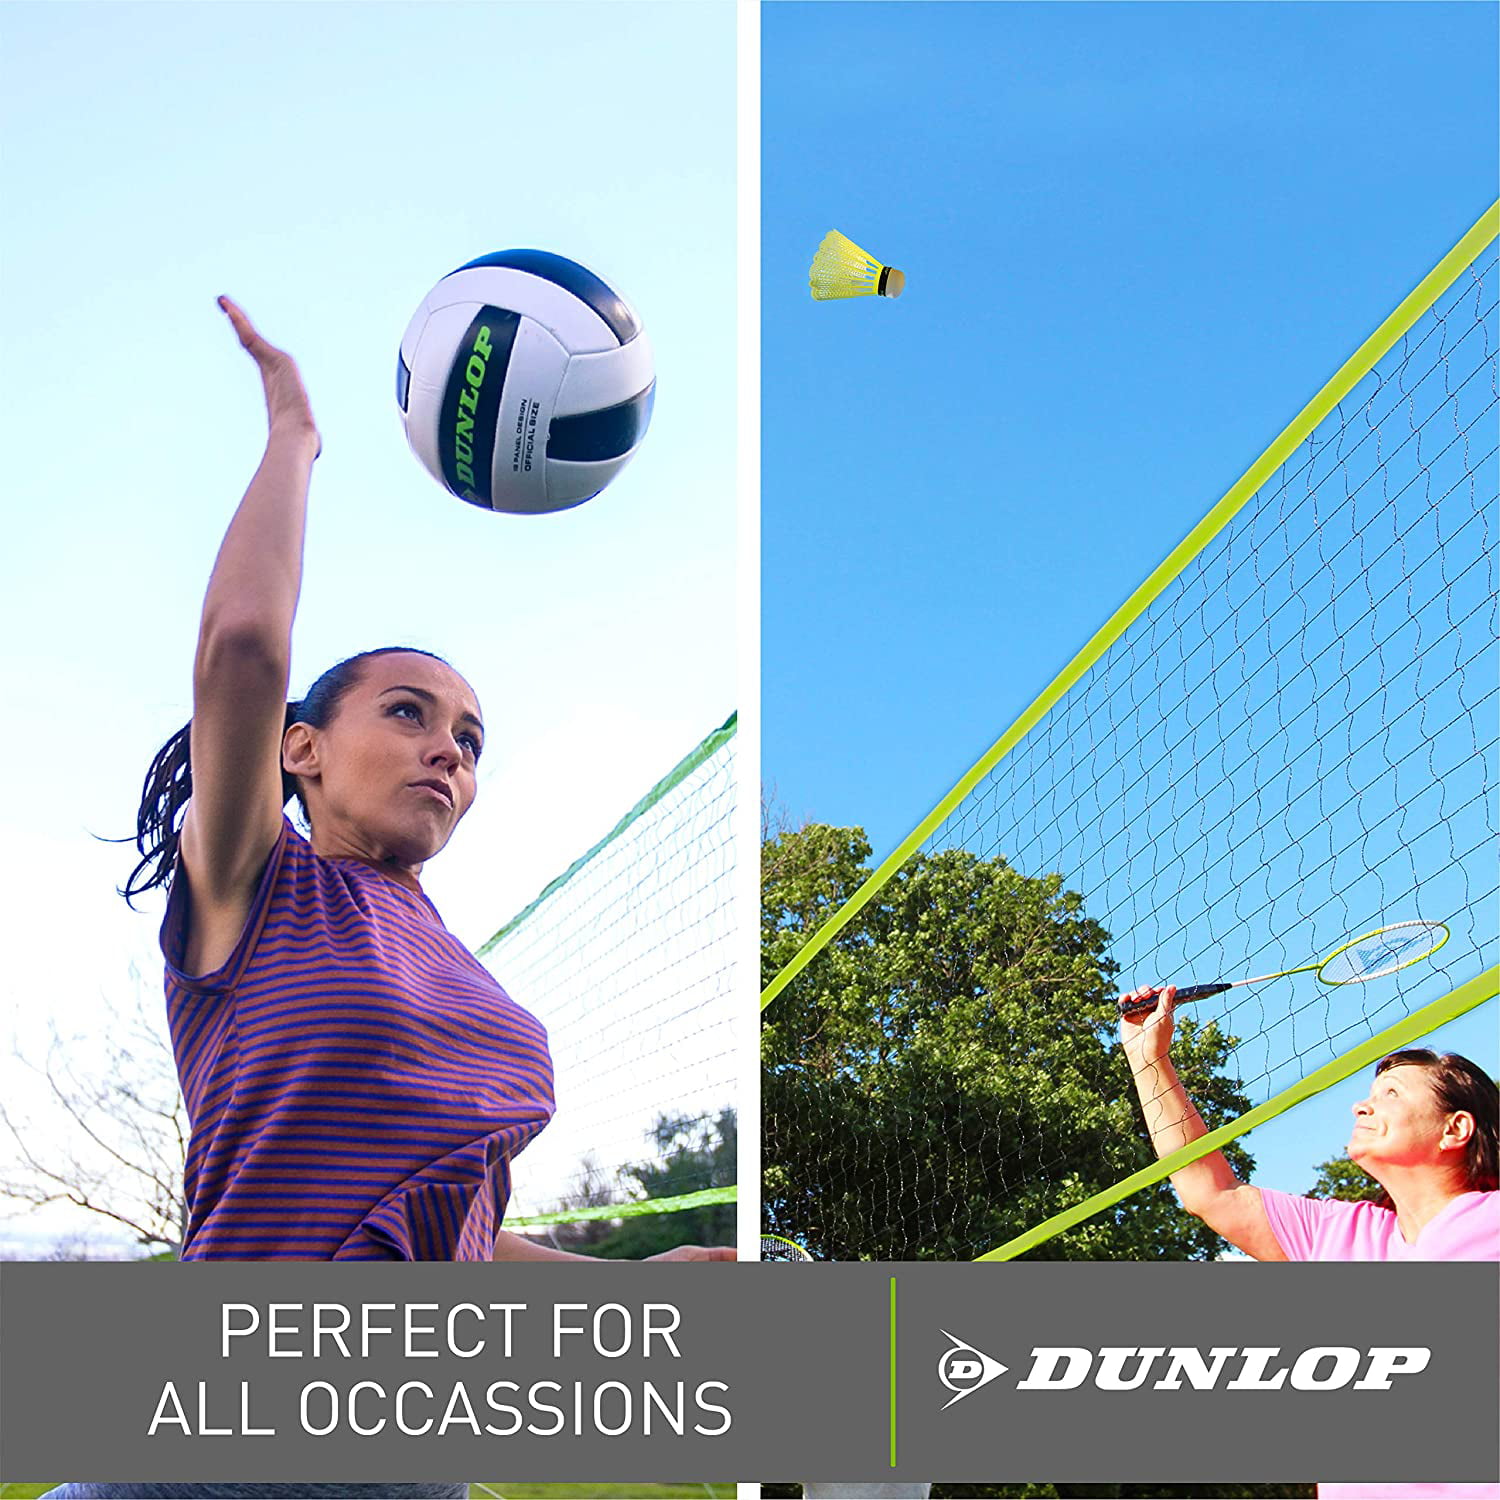 11-Piece Outdoor Backyard Part... Details about   DUNLOP Outdoor Volleyball Badminton Lawn Game 